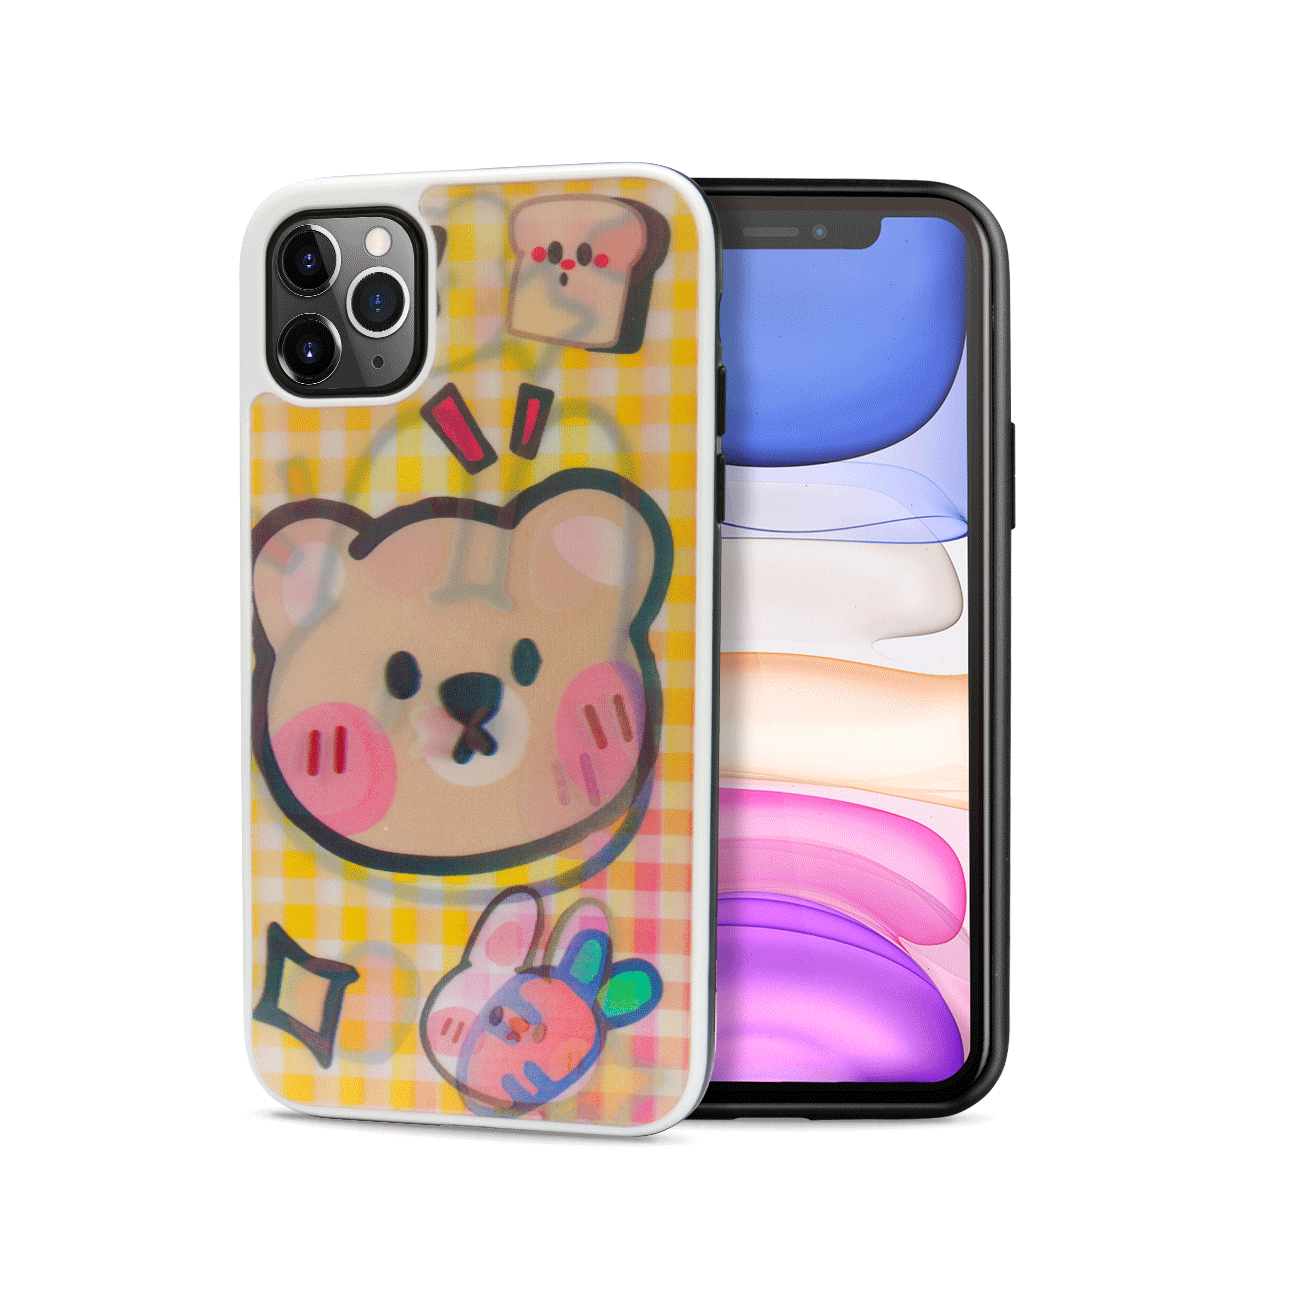 iPHONE 11 Pro Max (6.5in) 3D Dynamic Change Lenticular Design Case (Bunny)